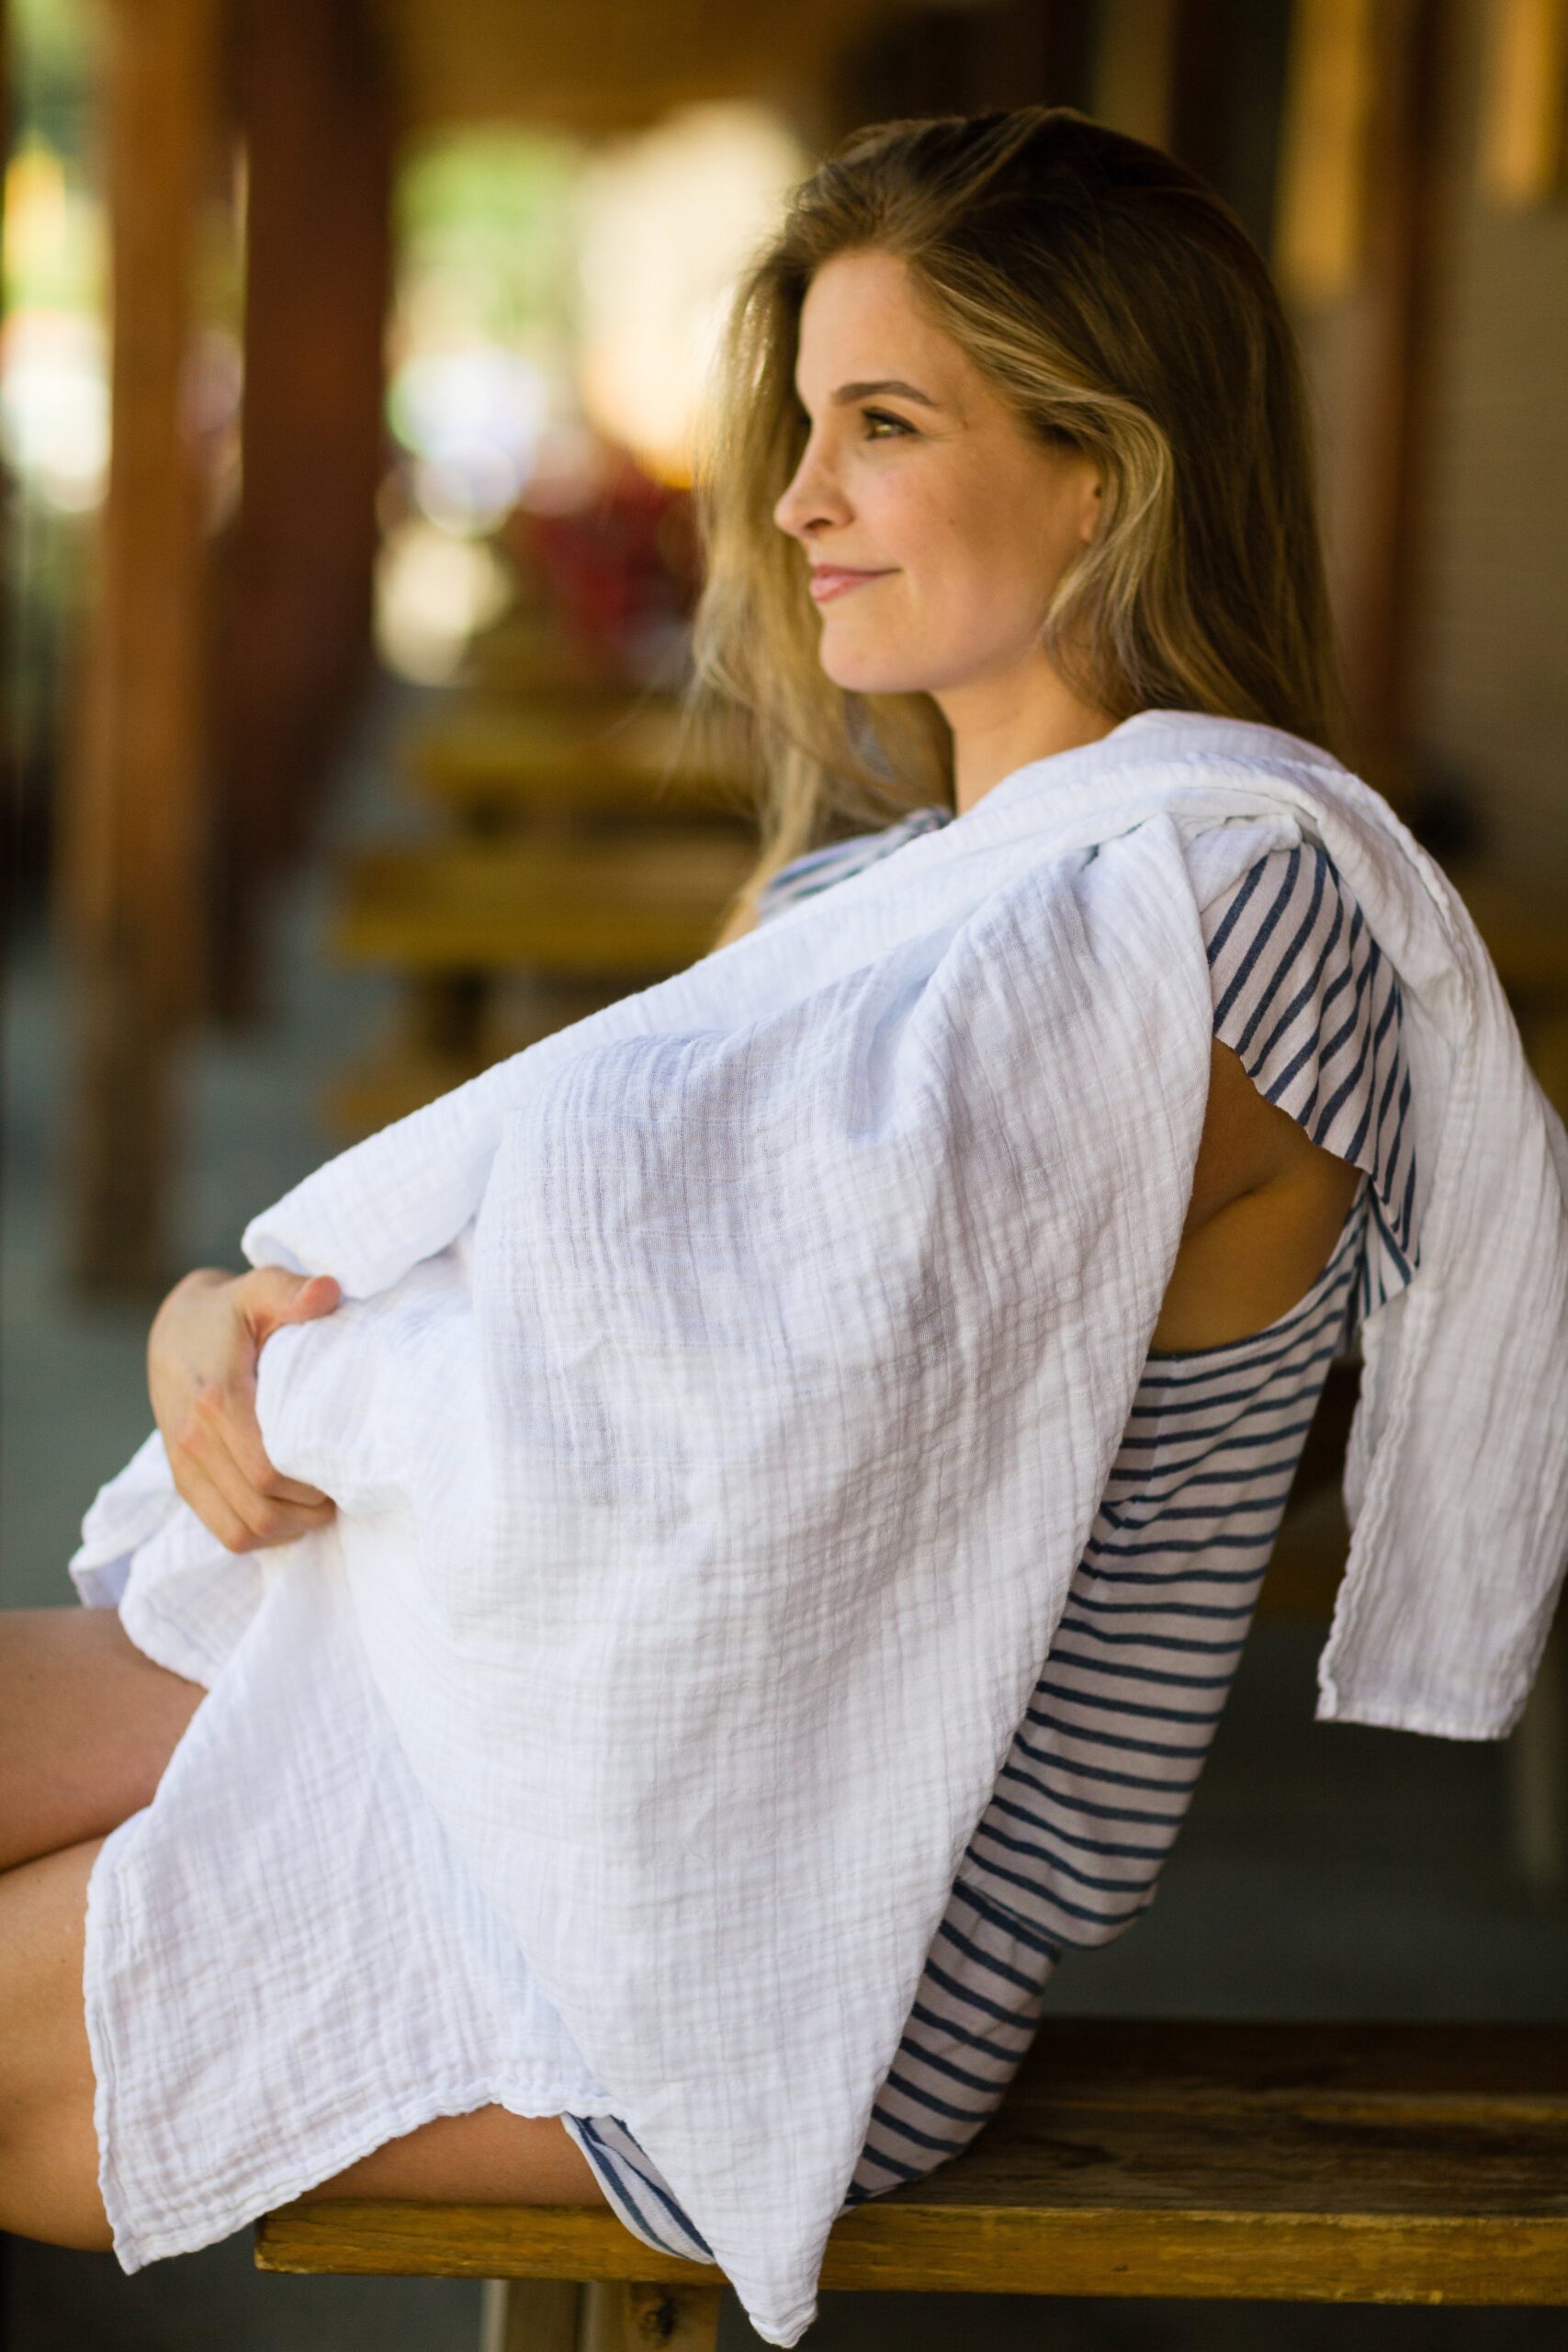 is postpartum anxiety normal